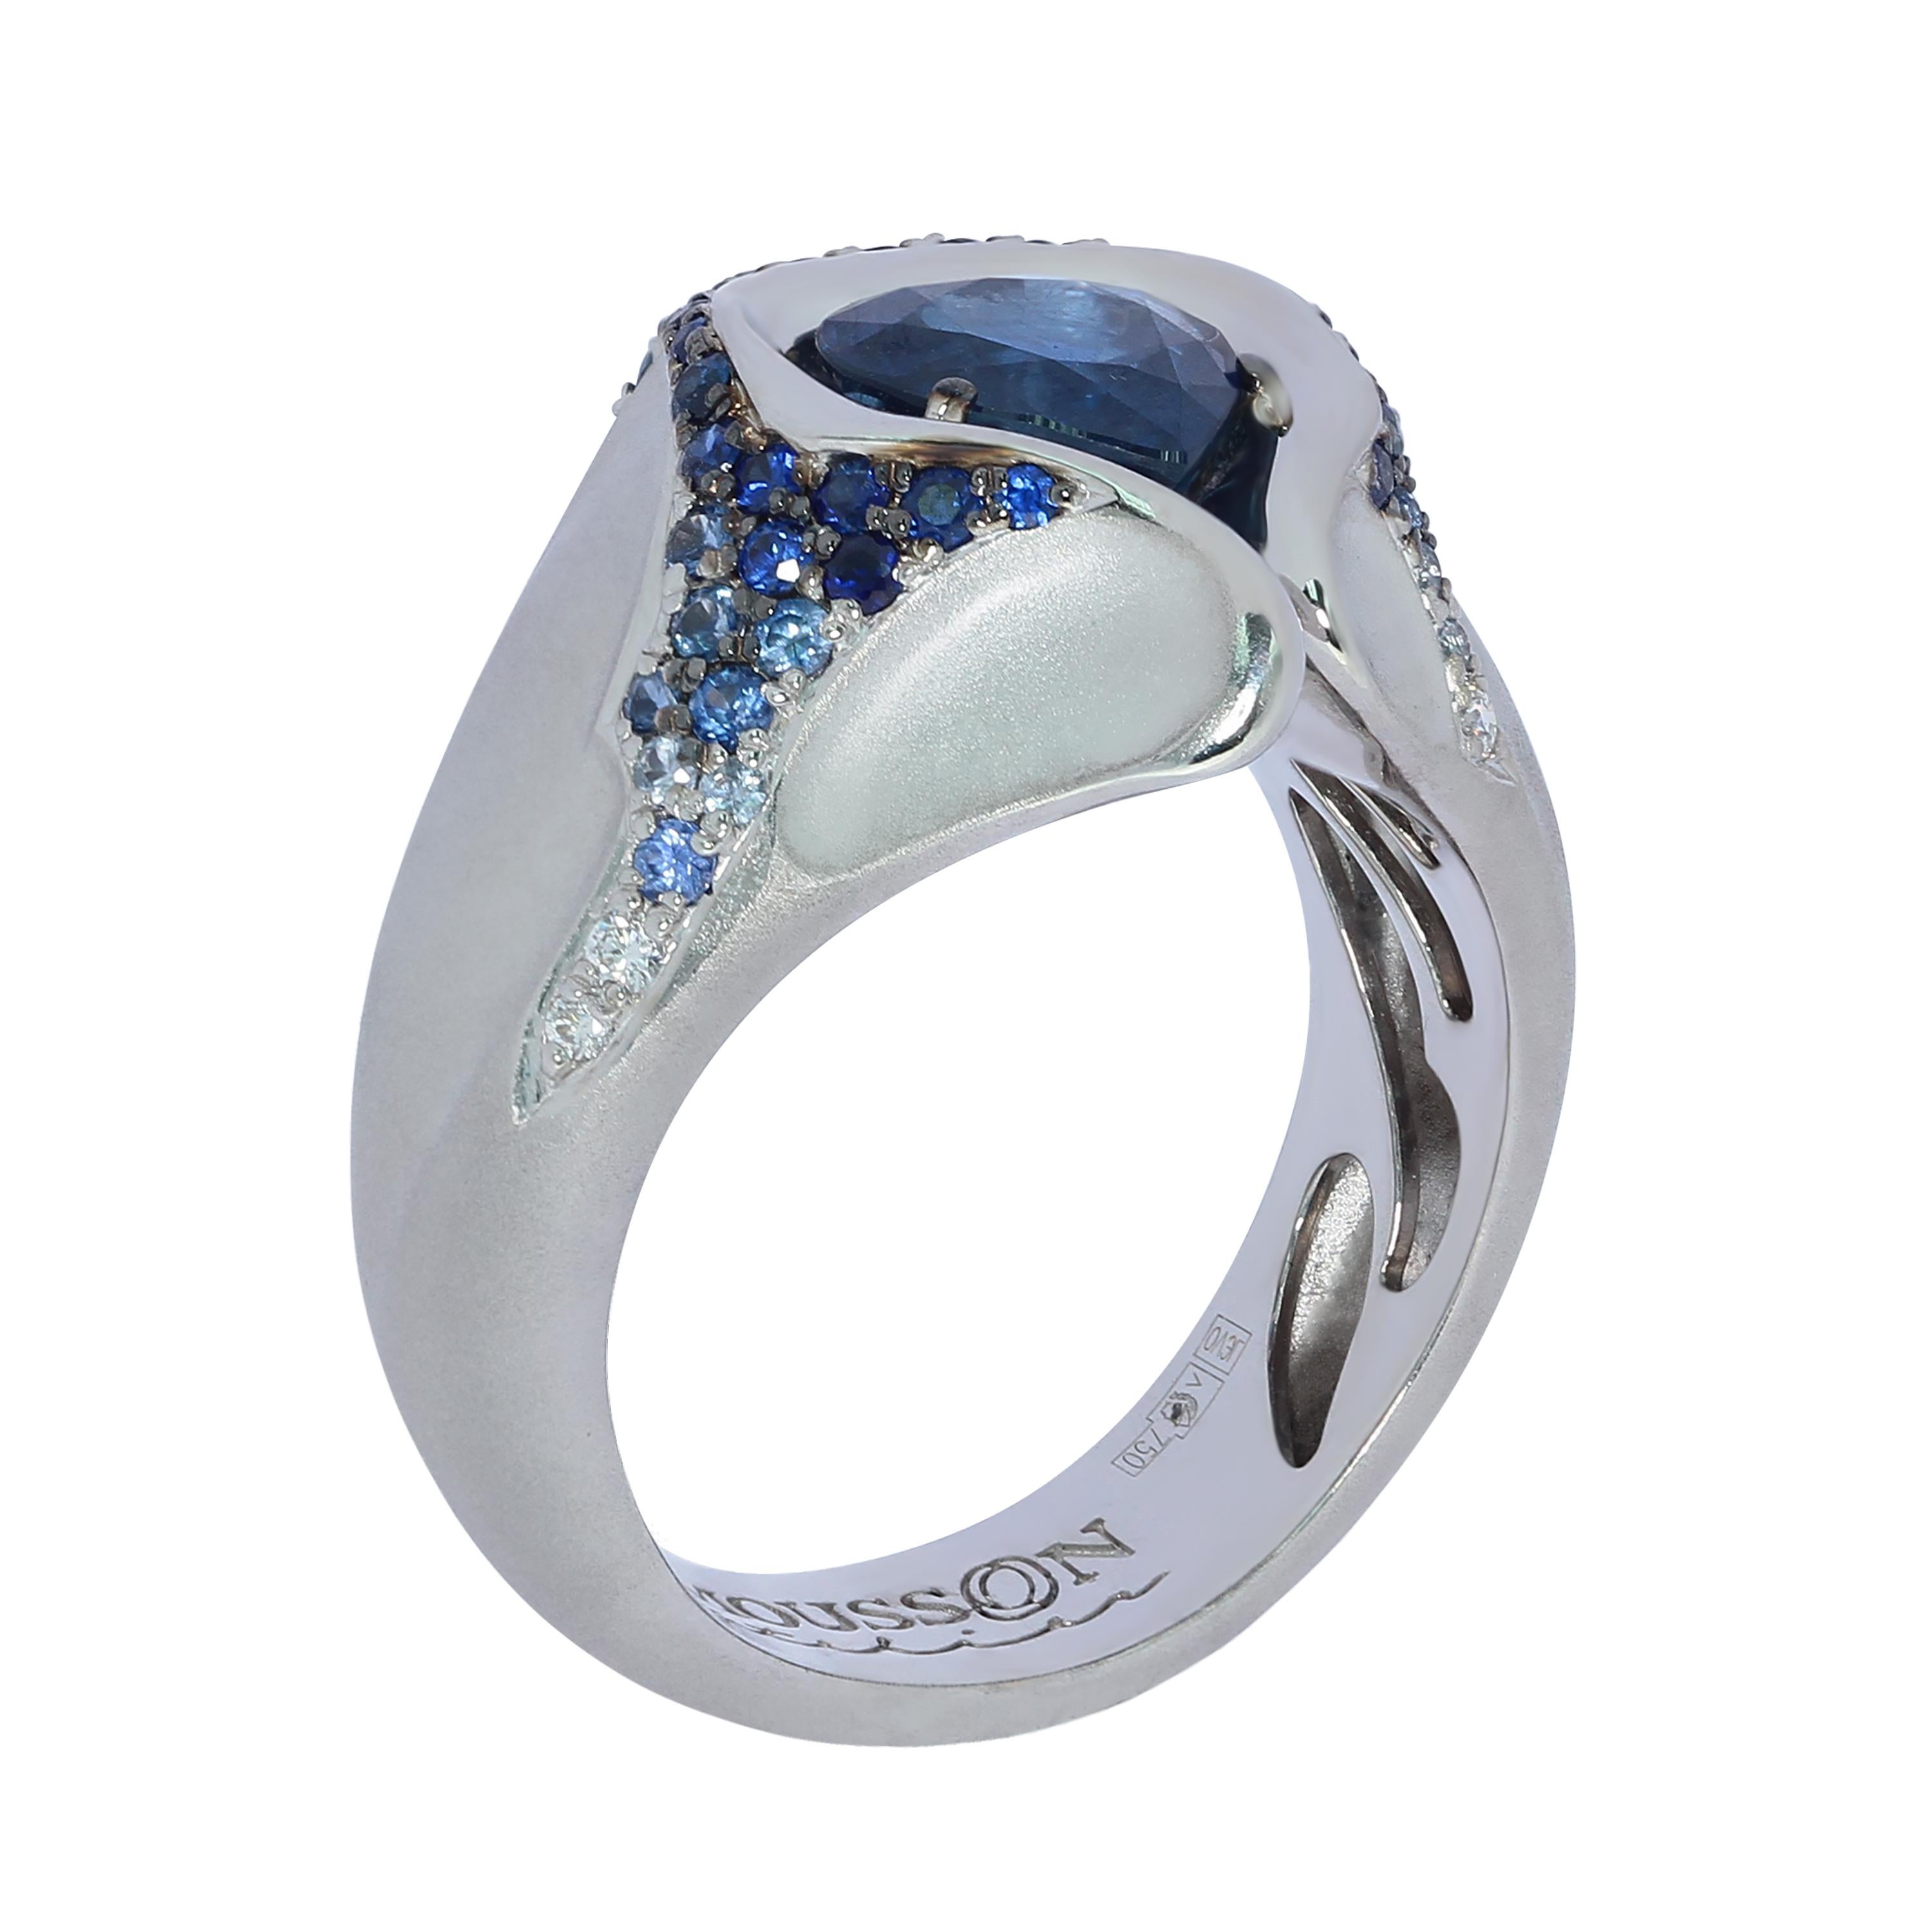 Sapphire Diamond 18 Karat White Gold HeartBeat Ring
White 18K matte Gold looks like a rock cracked from strong blows, through which a Blue heart-shaped 2.05 Carat Sapphire makes its way out. From the central stone there are cracks in which is